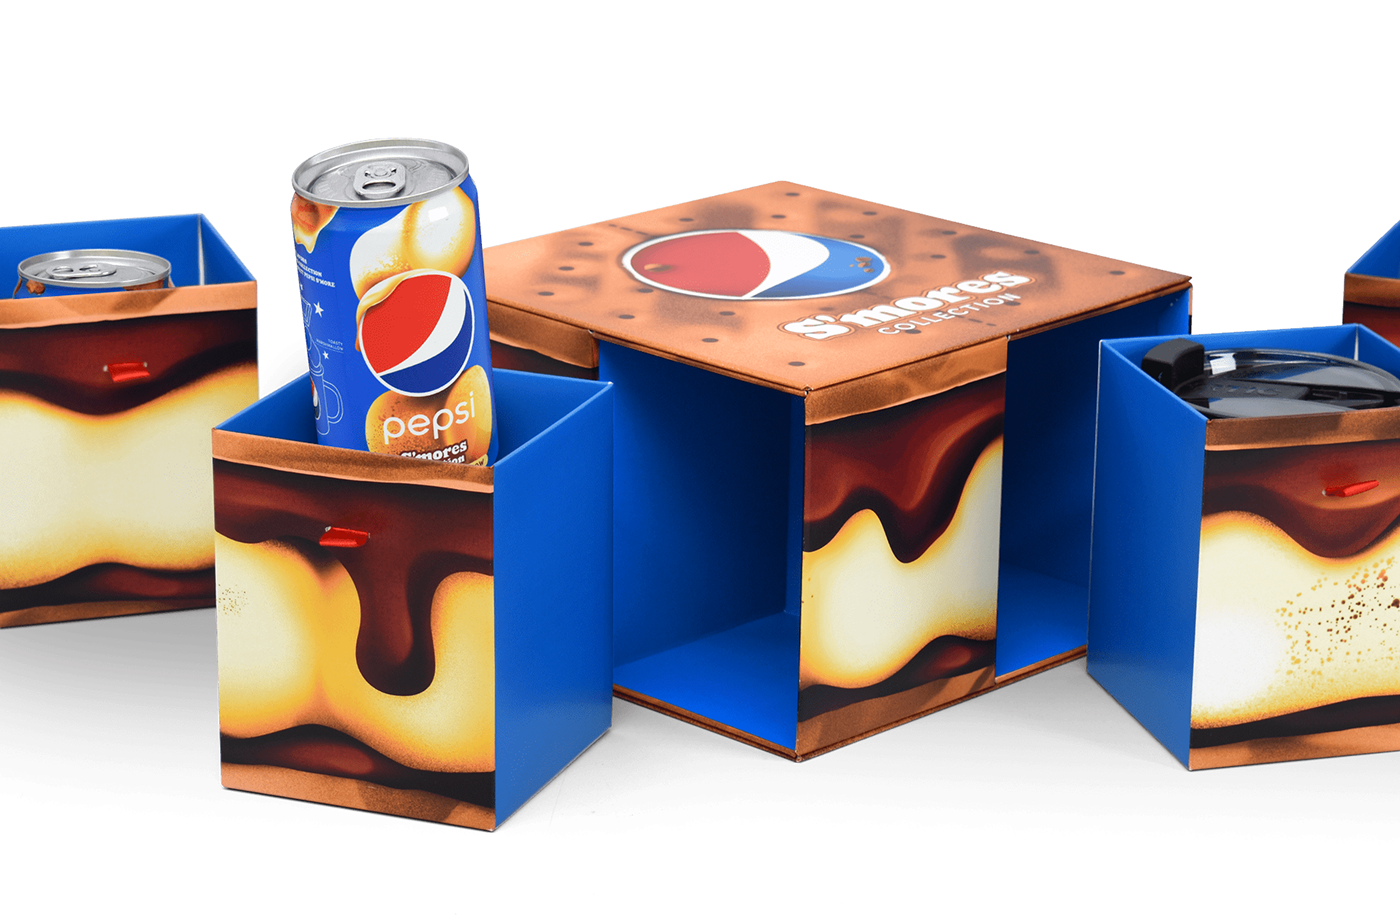 Influencer Unboxing Experience promoting the Pepsi S’mores collection, with limited edition flavors.